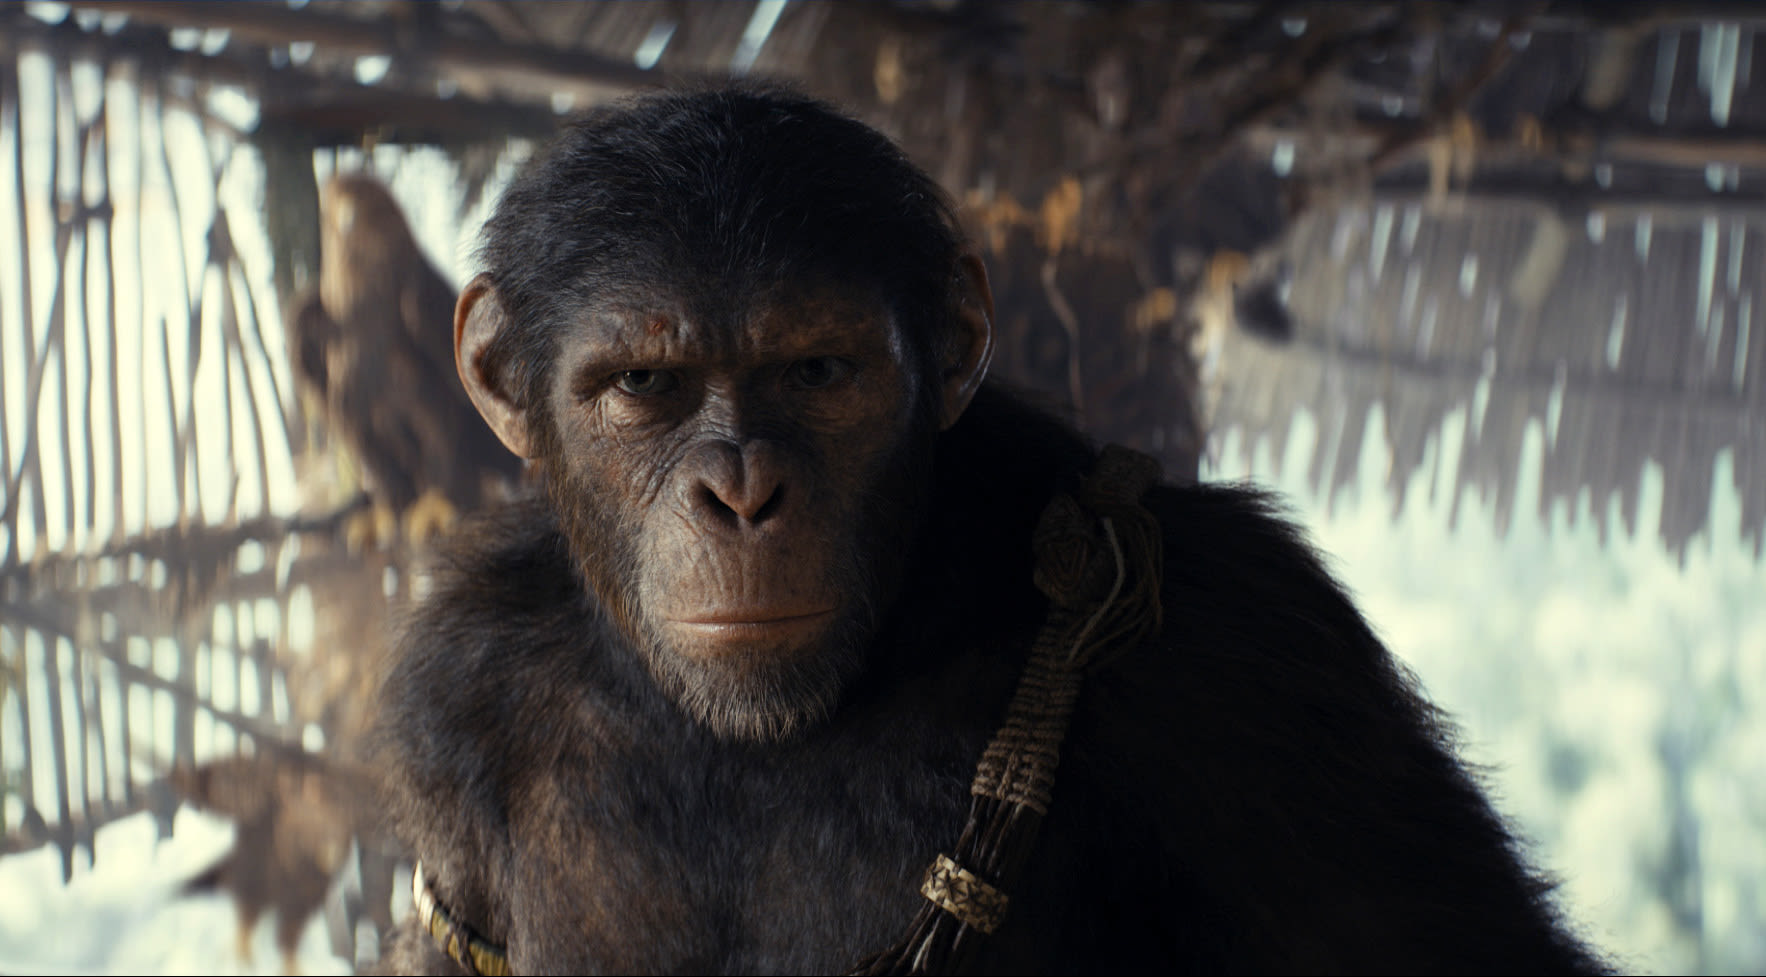 'Kingdom of the Planet of the Apes' reigns at box office with $56.5 million opening